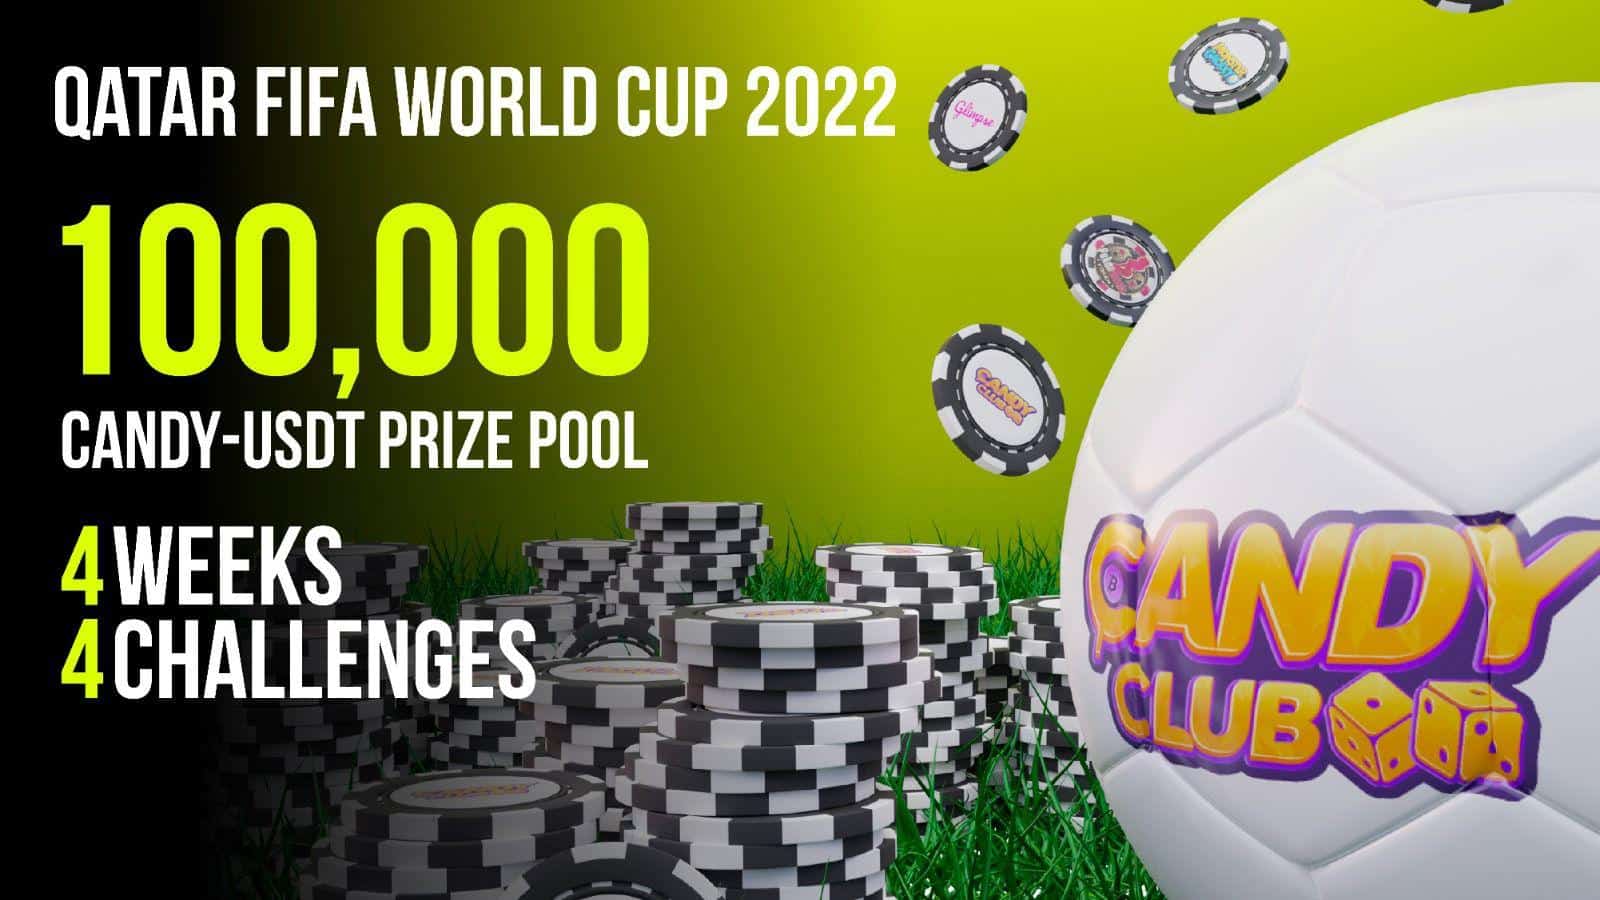 Candy-club-offers-100,000-candy-usdt-reward-for-world-cup-celebration